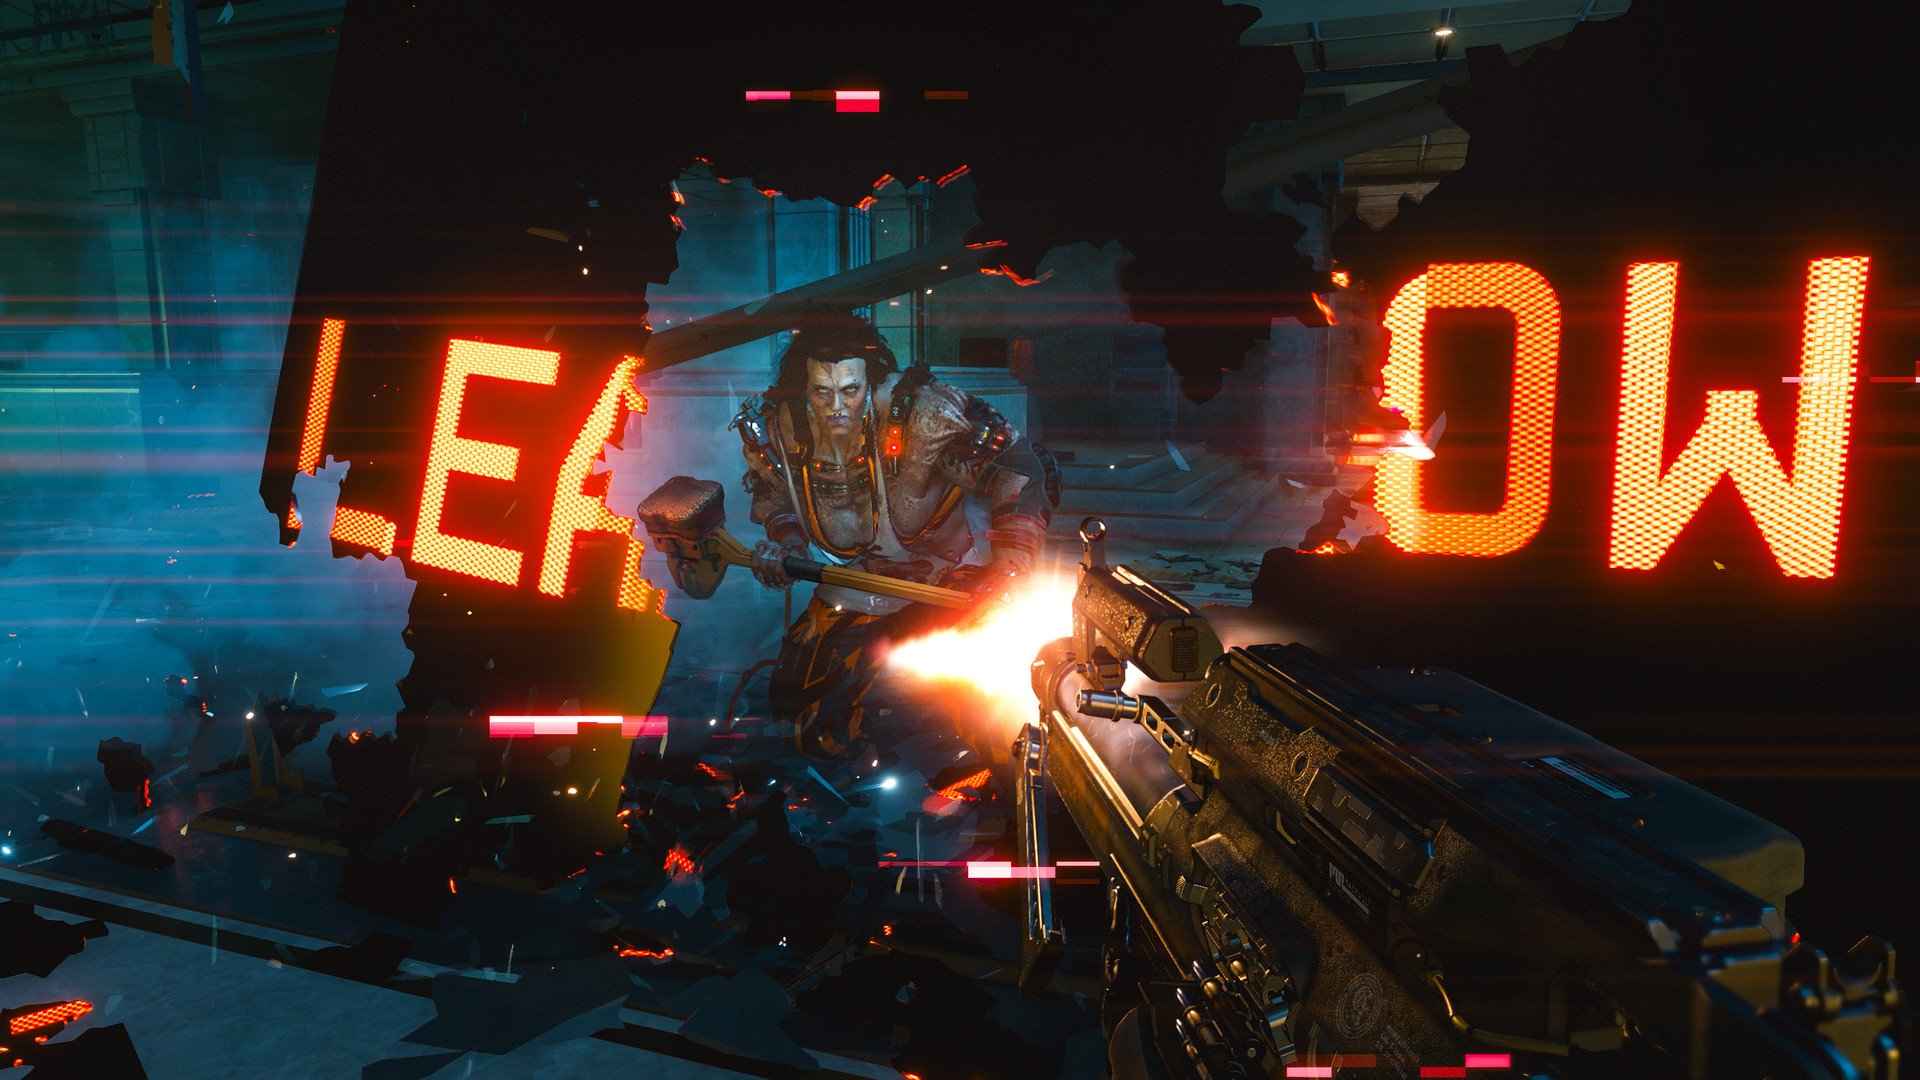  Does Cyberpunk 2077 have microtransactions? 